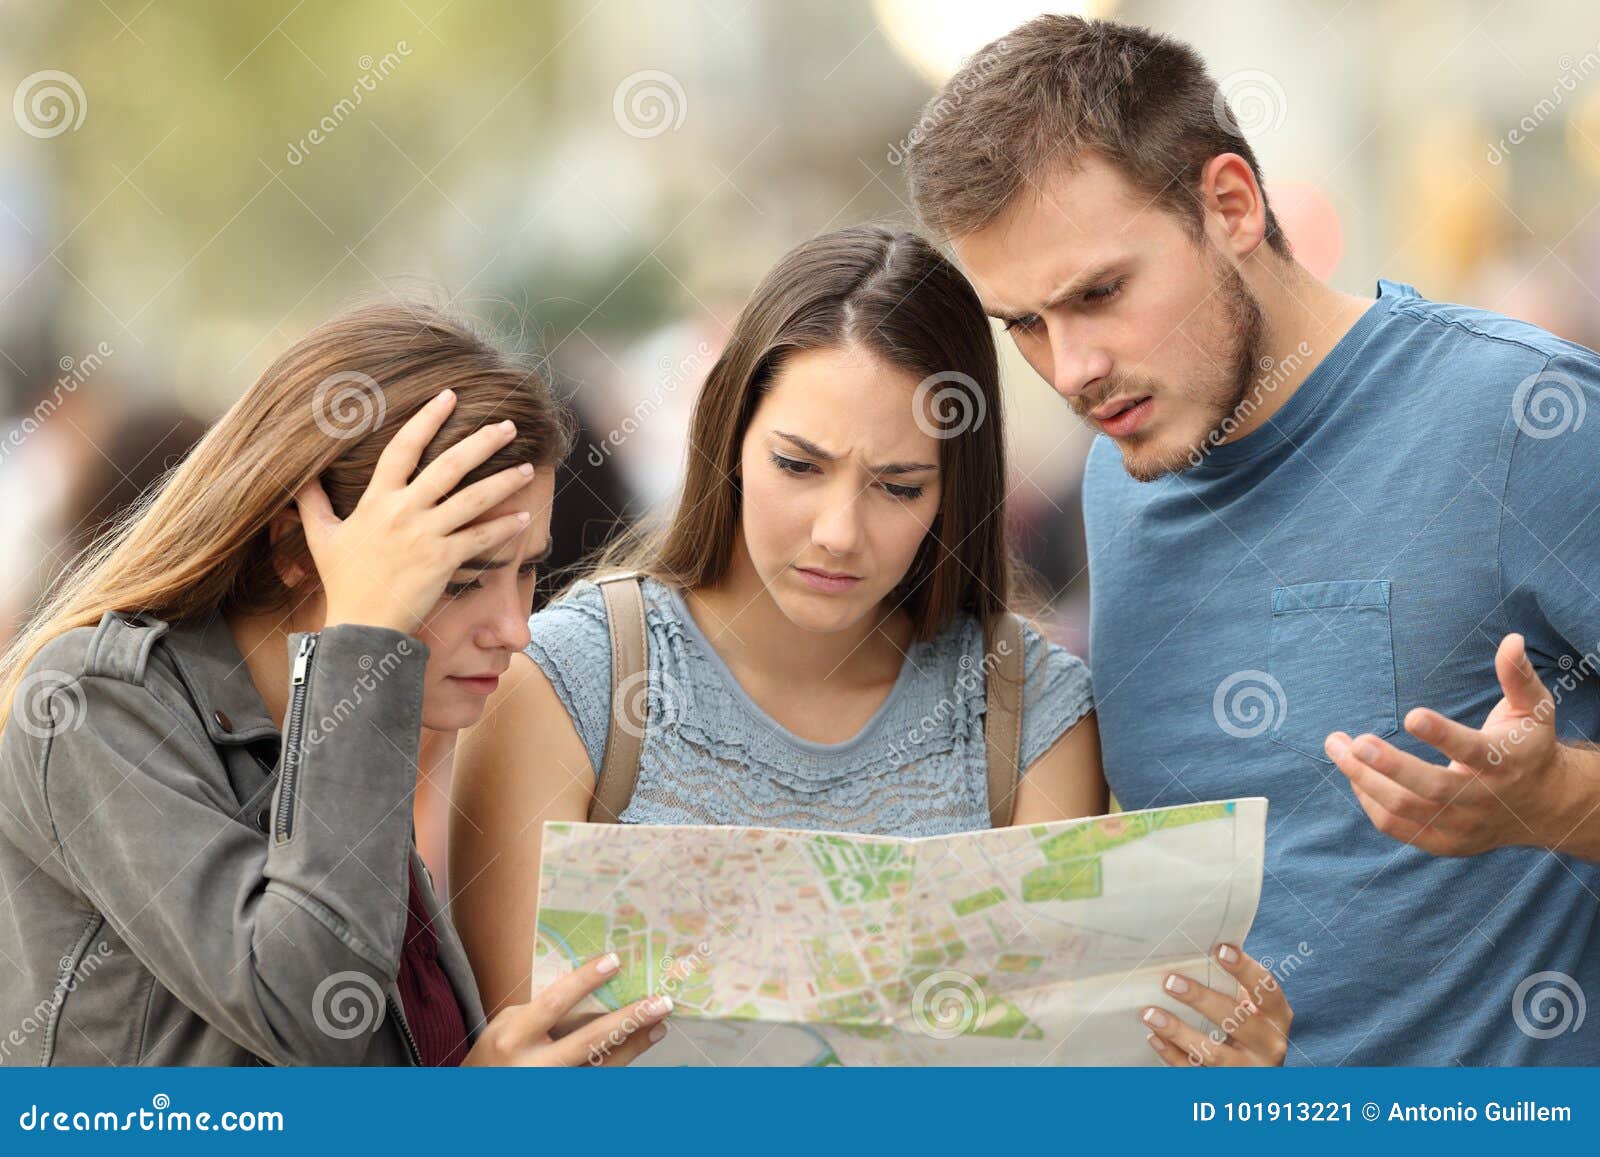 three lost tourists trying to find a location in a map